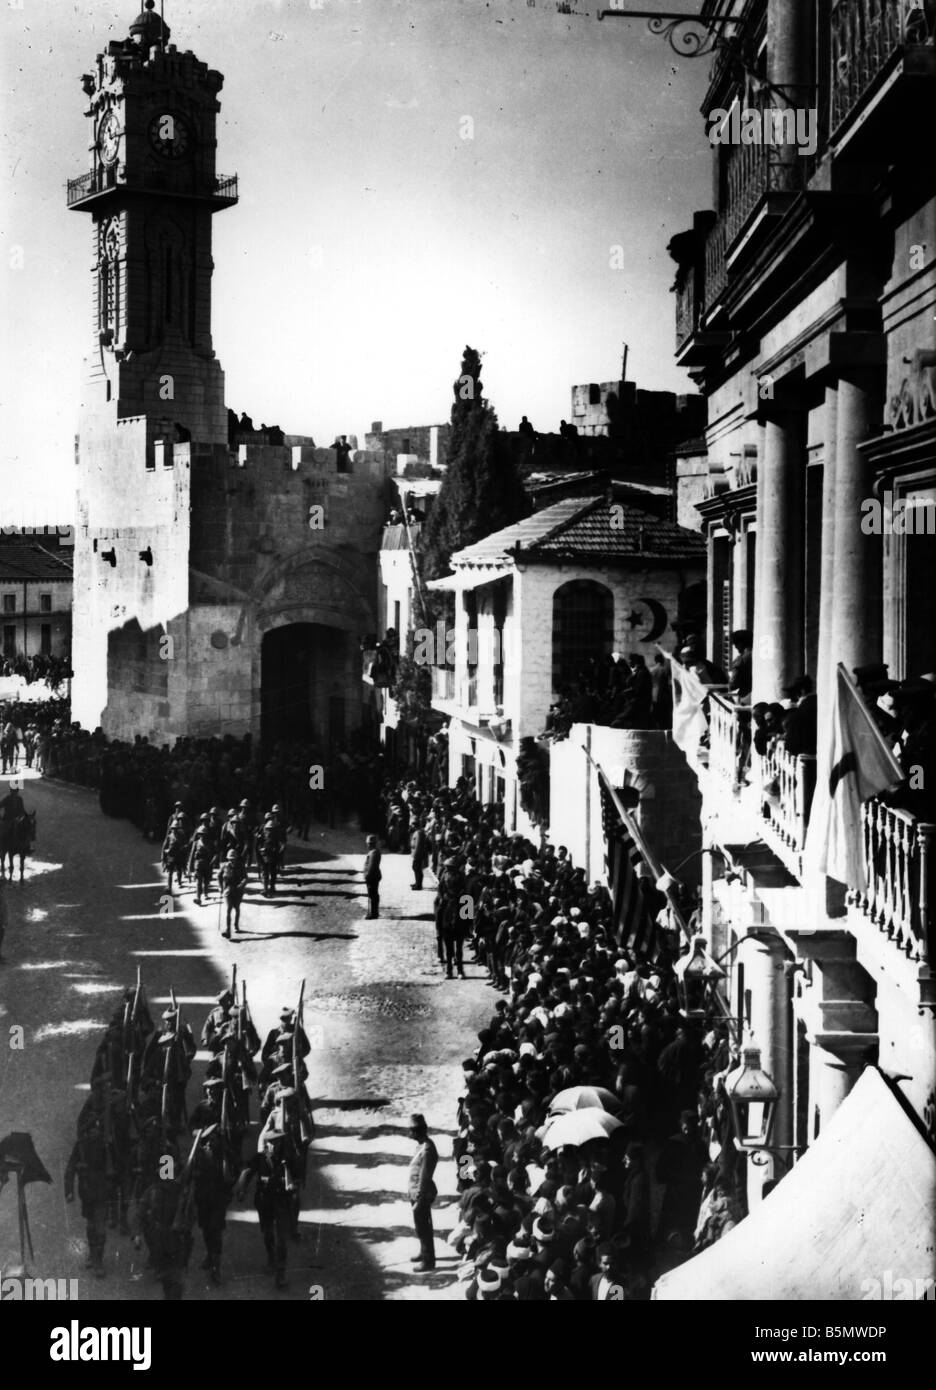 9IS 1917 12 9 A1 5 E WW1 Capture of Jerusalem by Britain World War 1 Turkish British battles Capture of Jerusalem by British tro Stock Photo